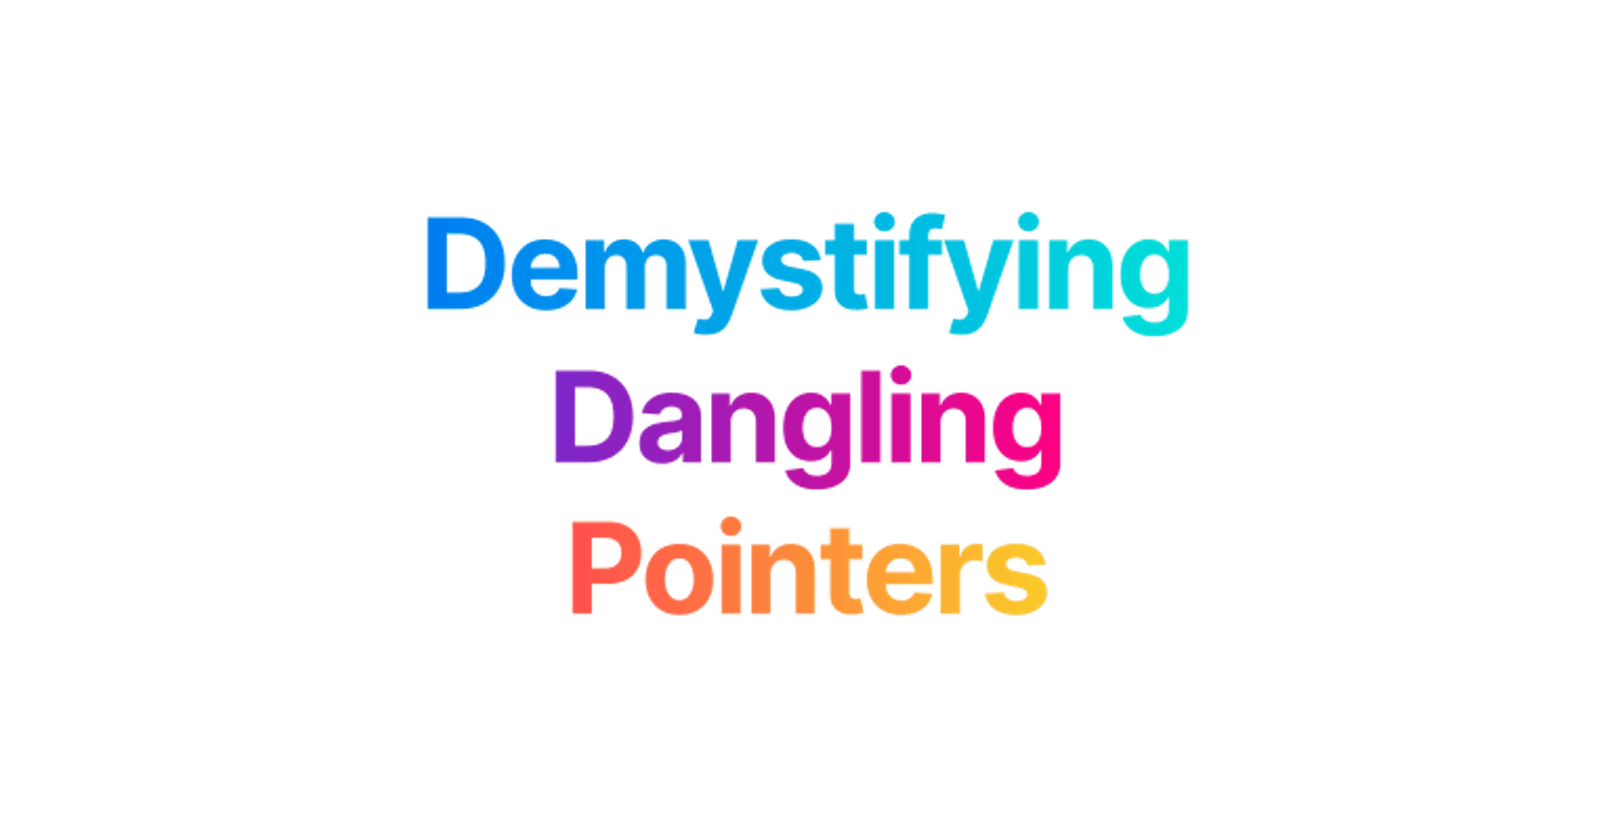 Demystifying Dangling Pointers